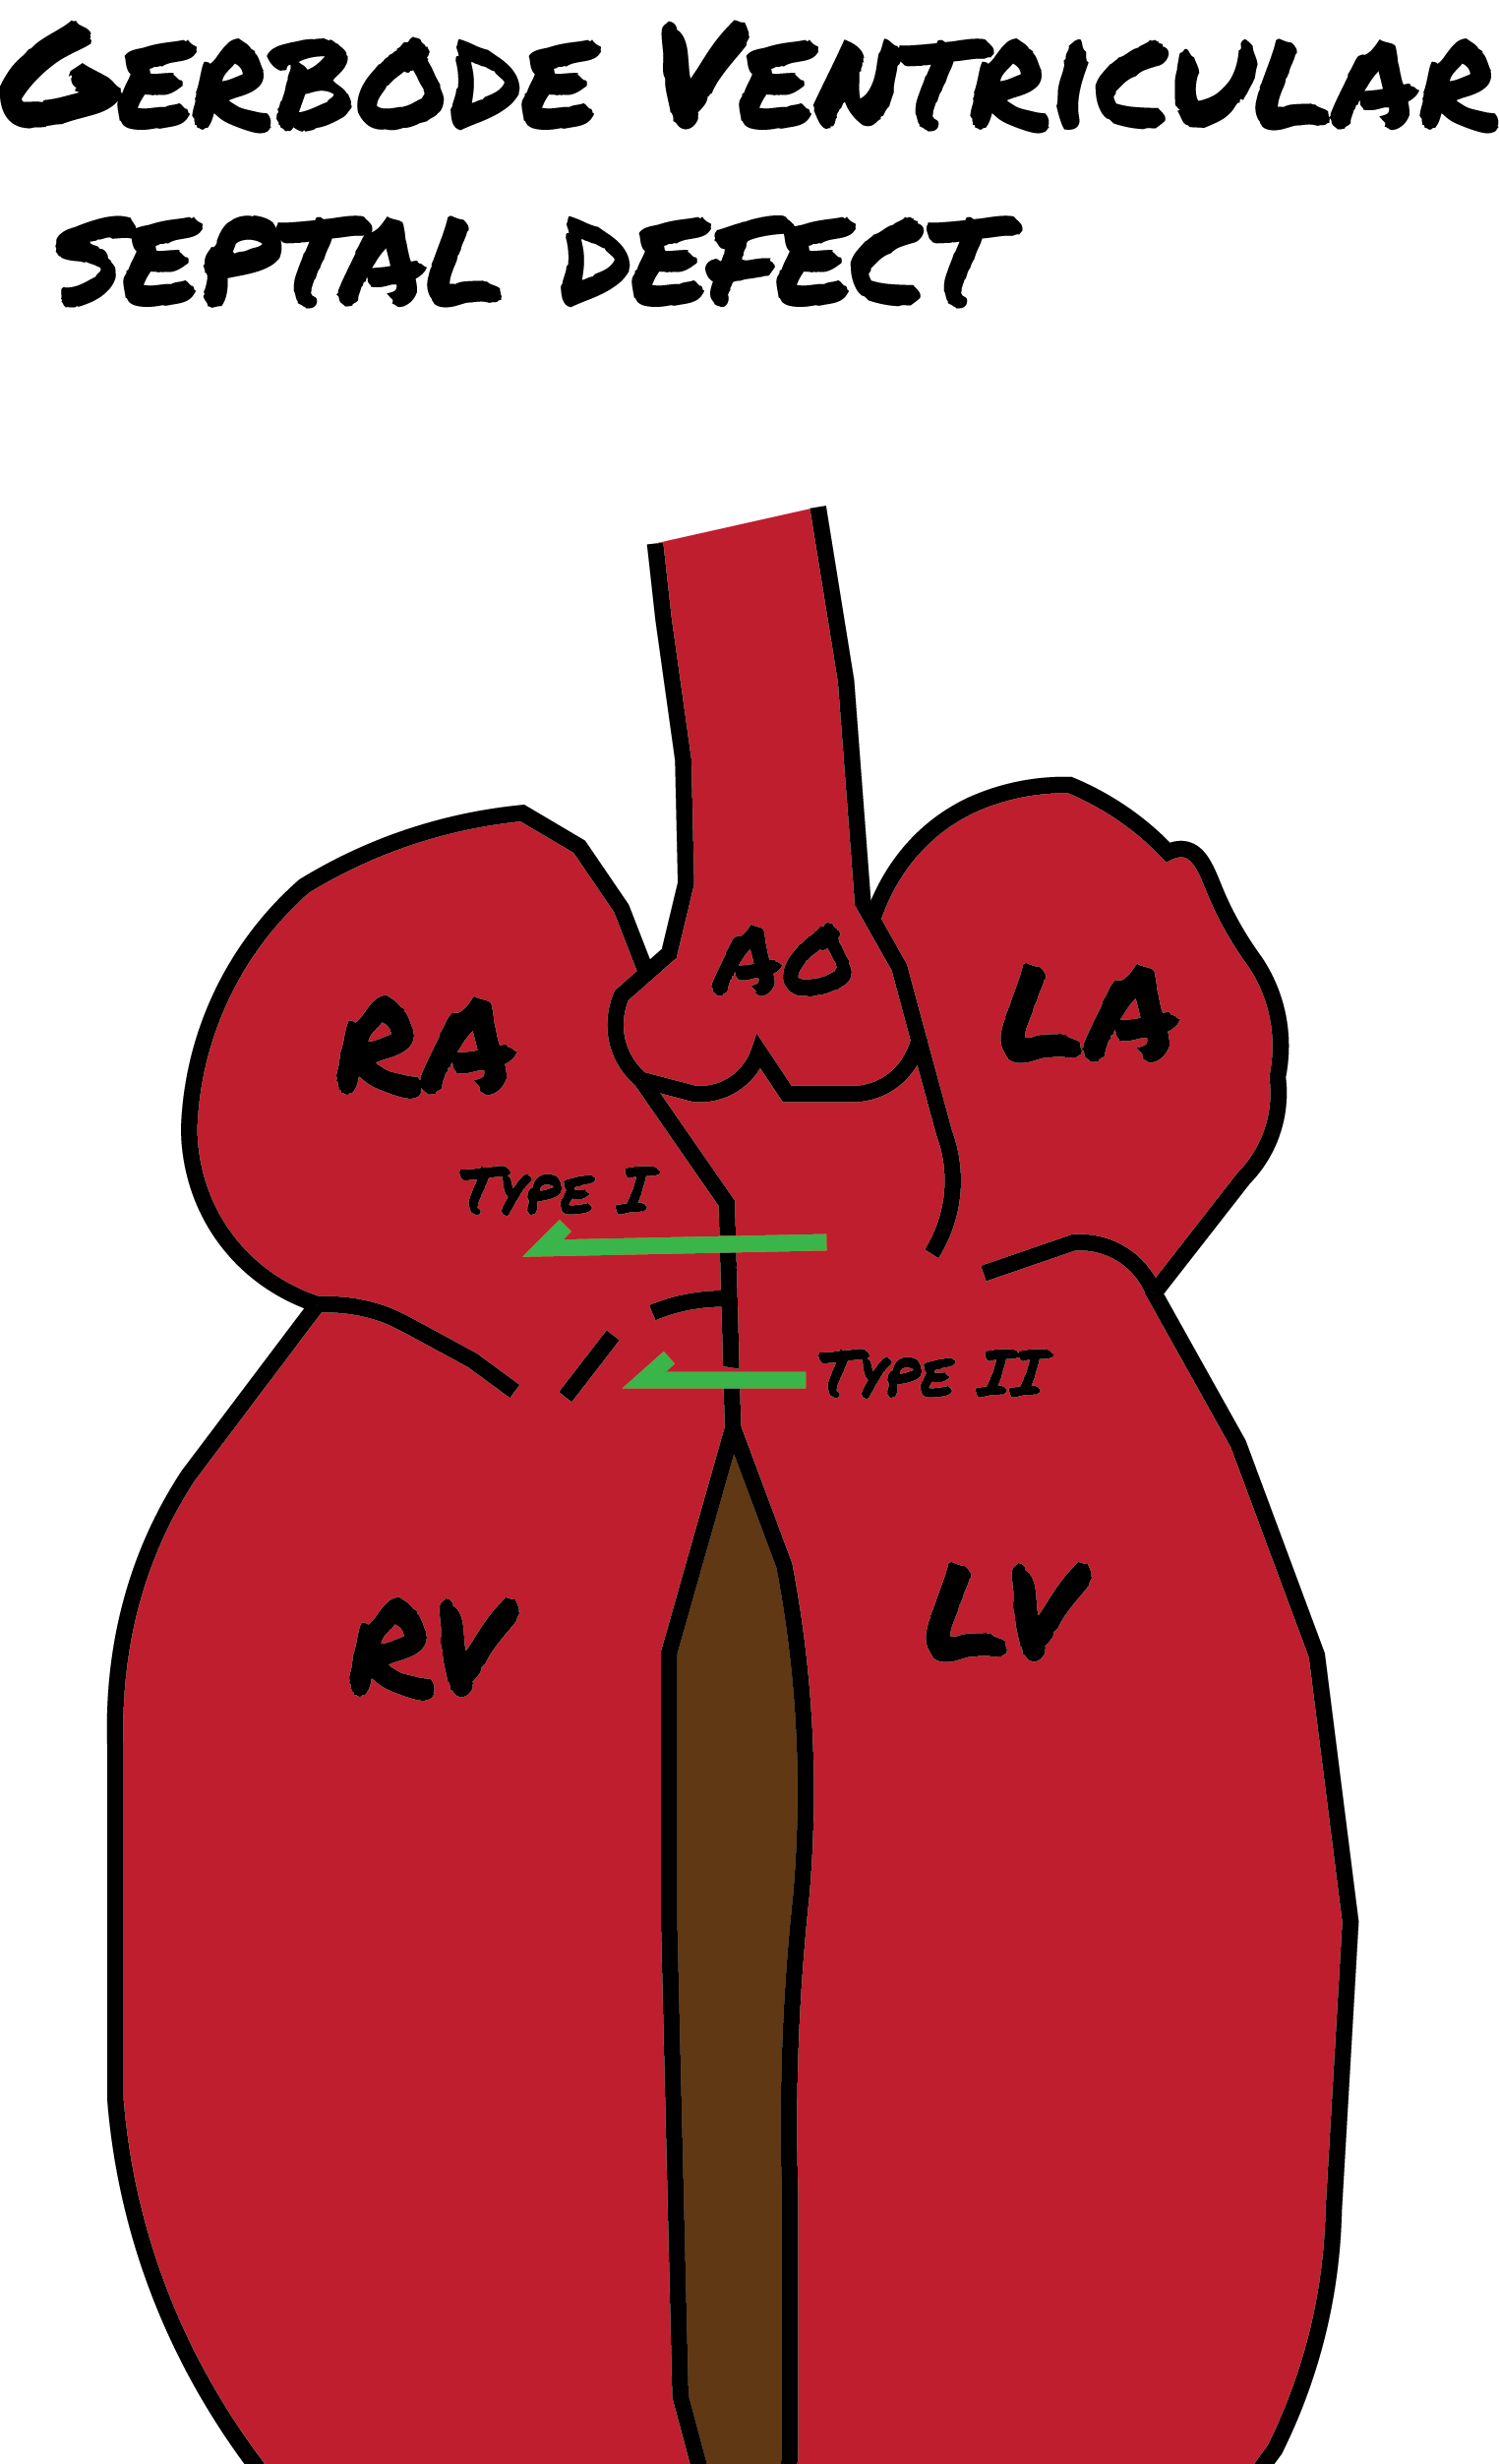 <p>Gerbode Defects. Illustration of the supra &amp; subvalvular defects seen in Gerbode ventricular septal defects.</p>